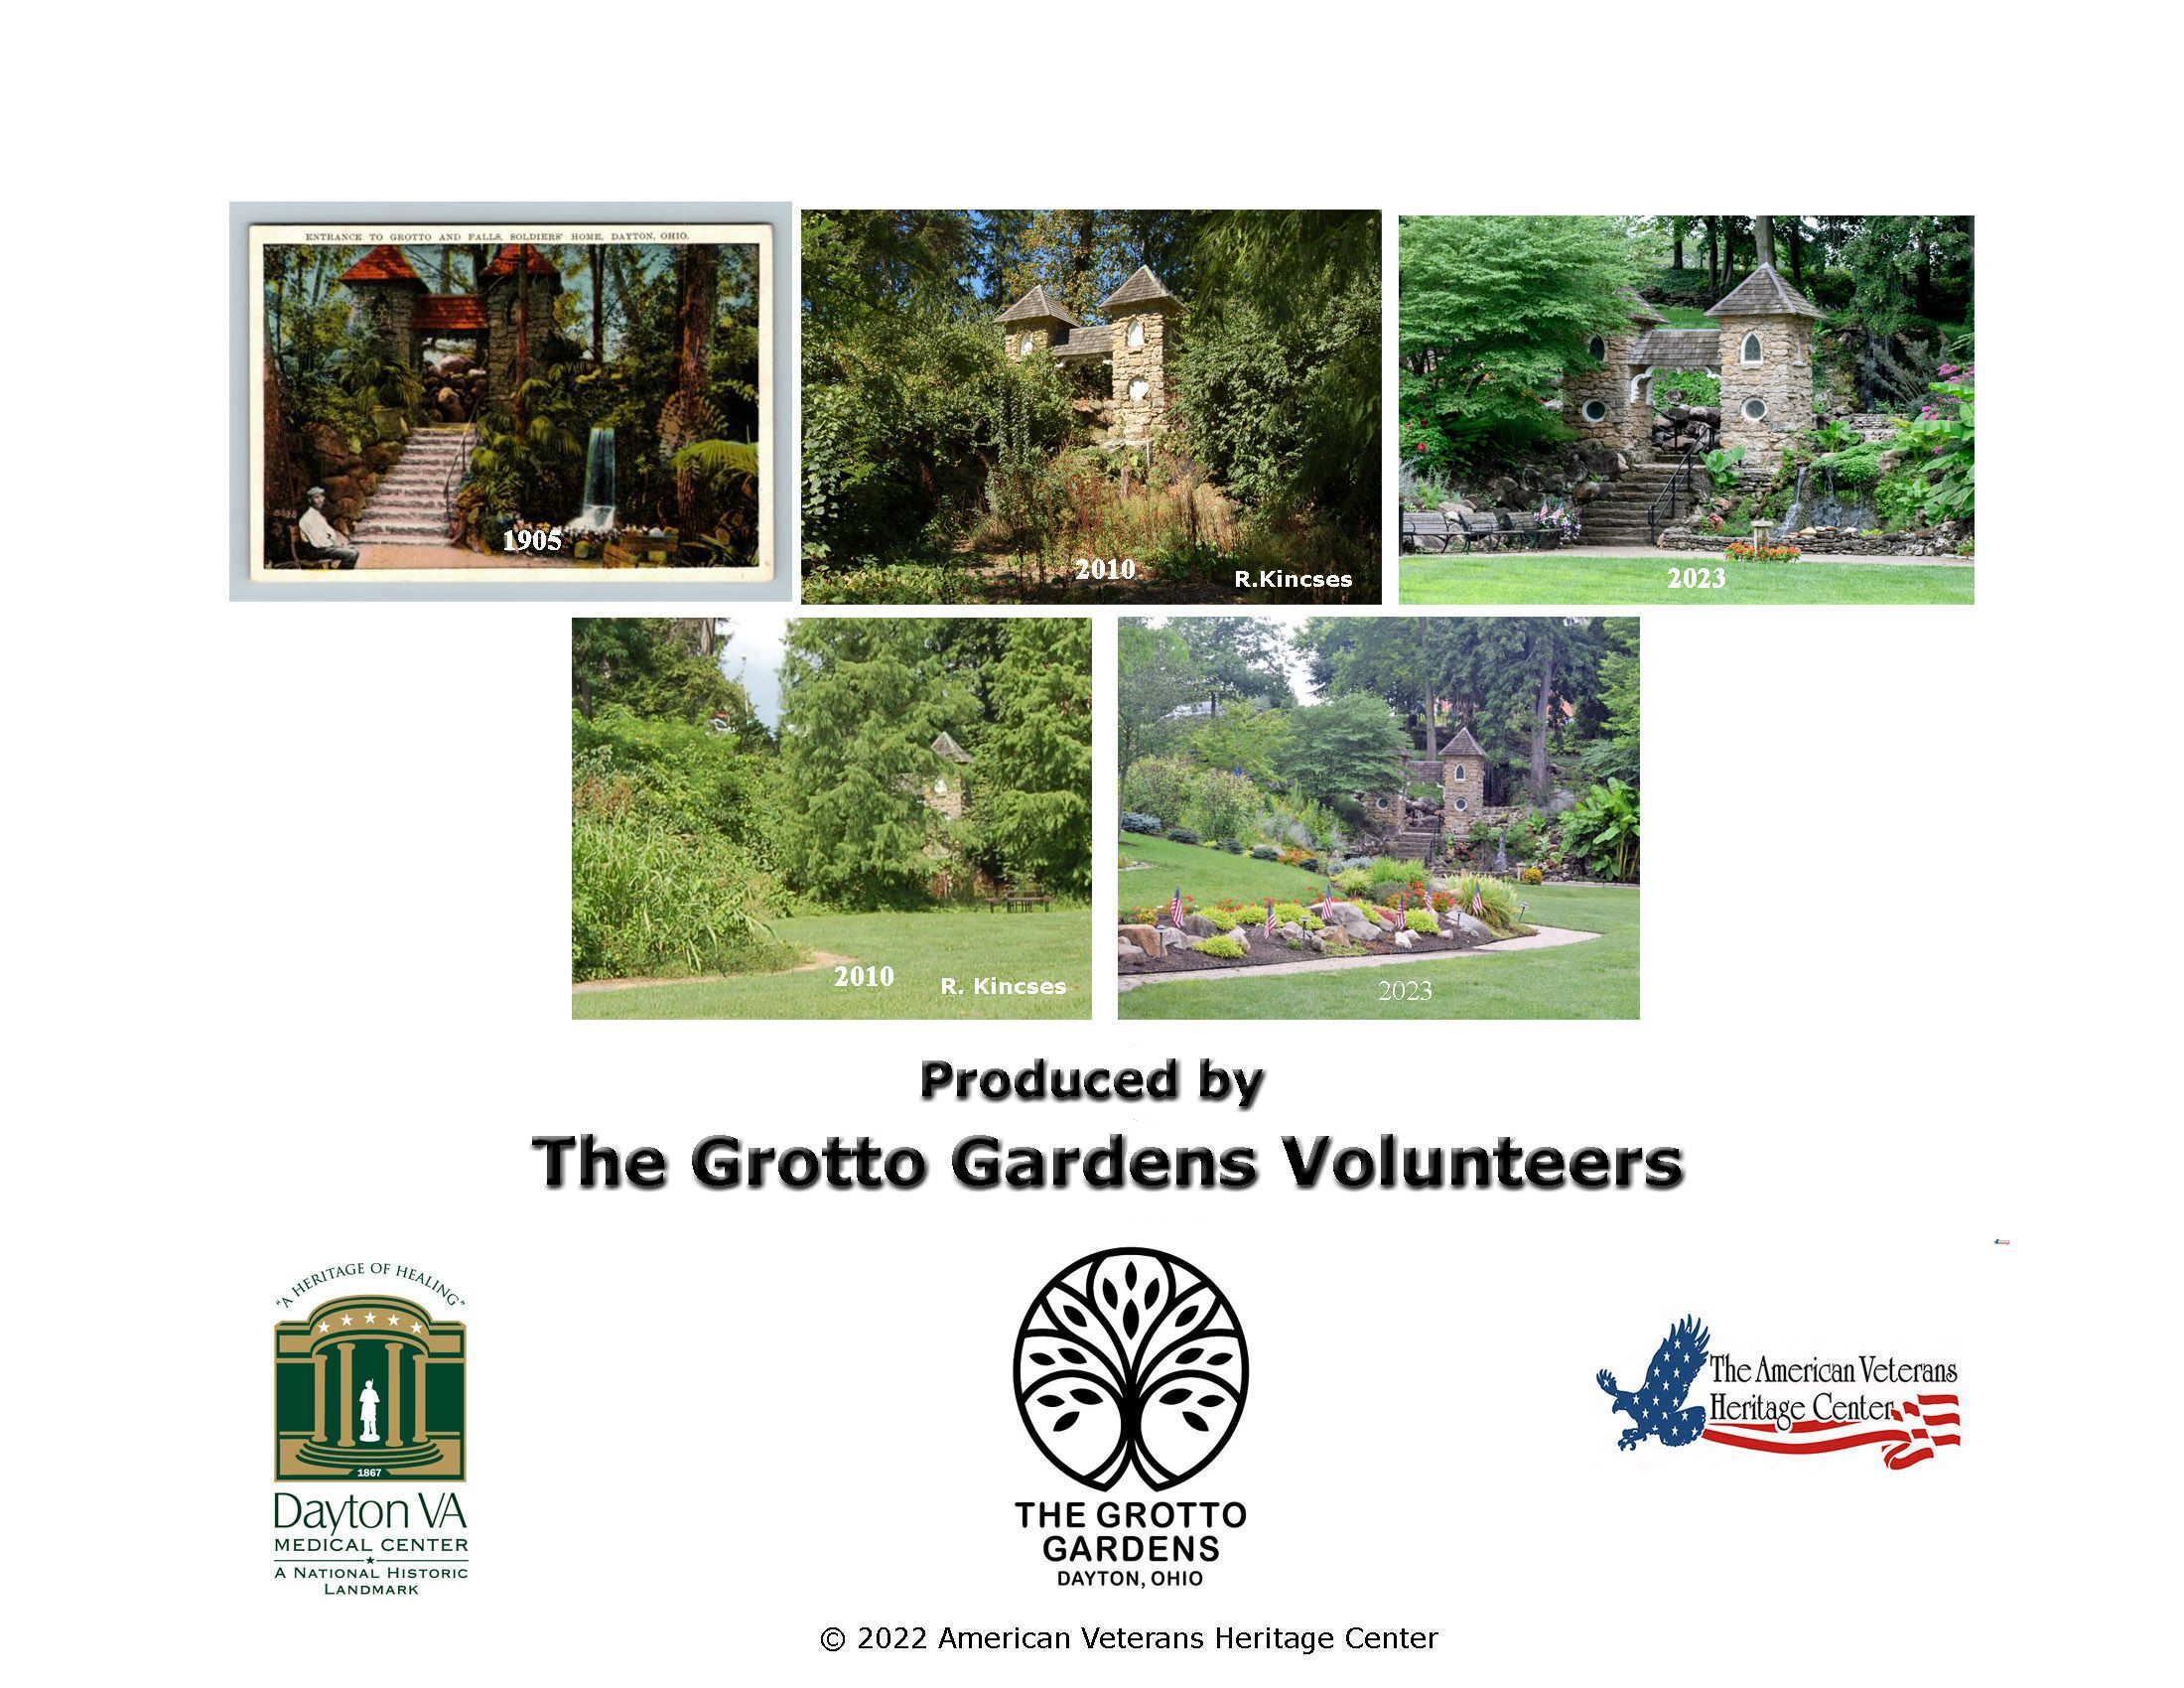 2023 Grotto Gardens Calendars are available